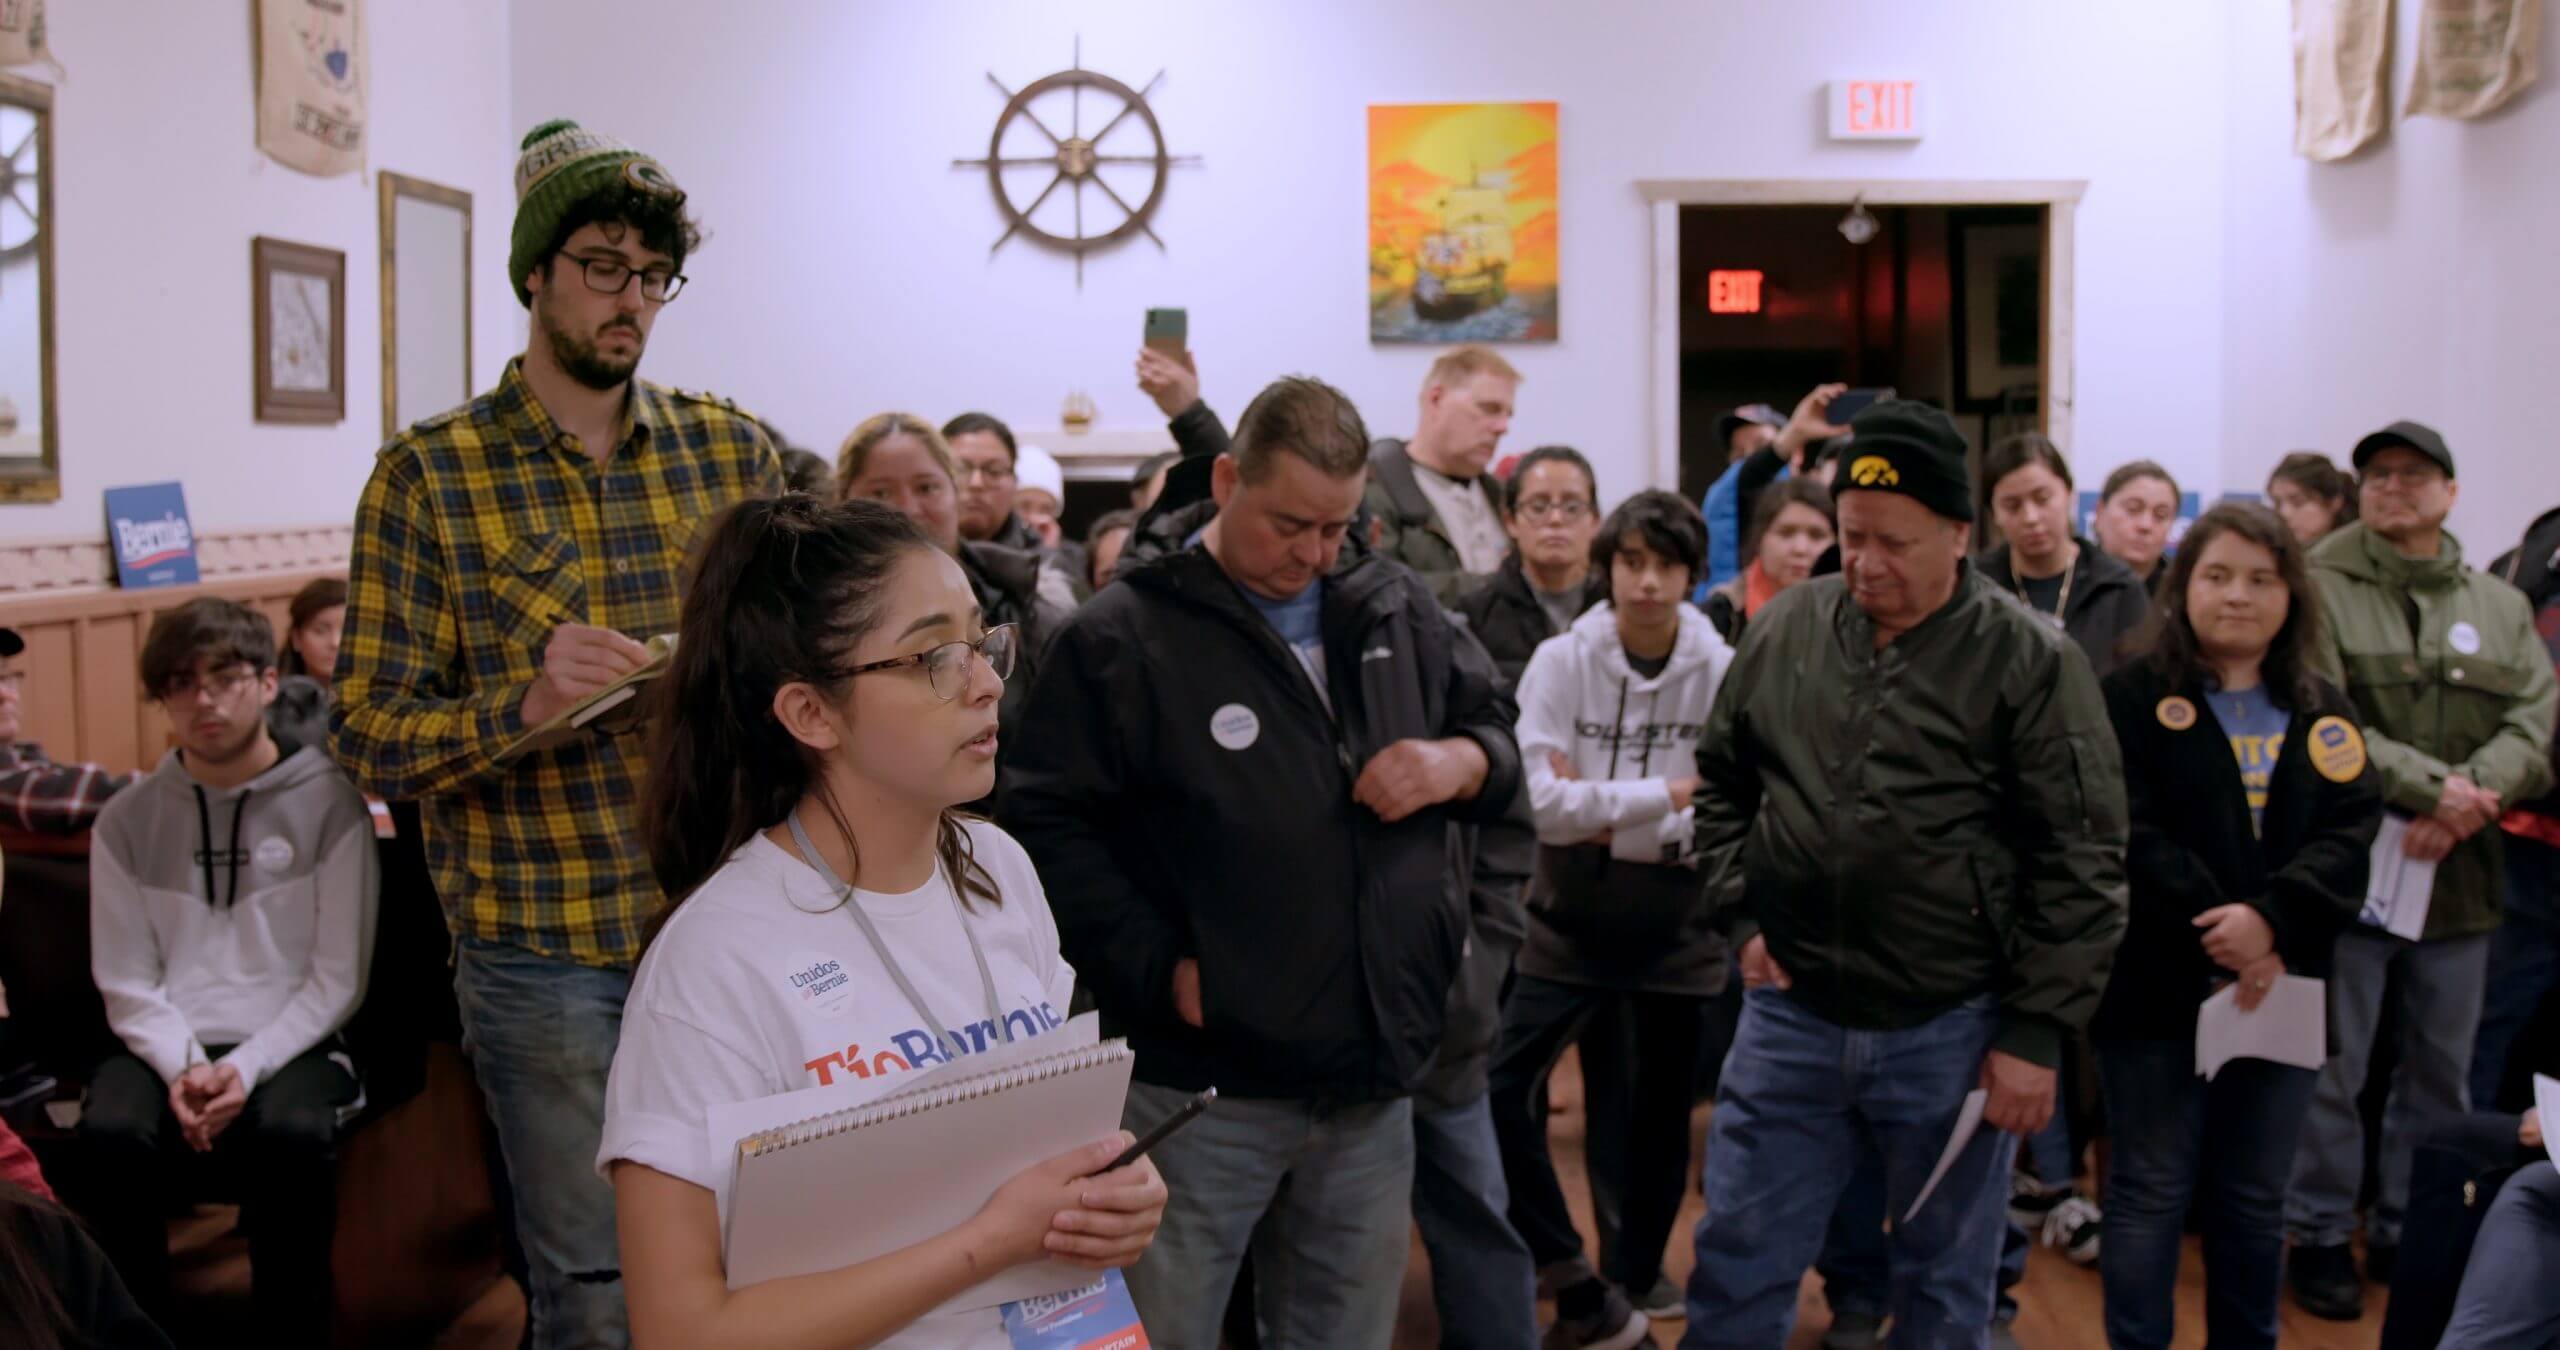 Still from Storm Lake. People in a meeting. In the foreground, a young person with a notebook wears a t-shirt that says "Tio Bernie."